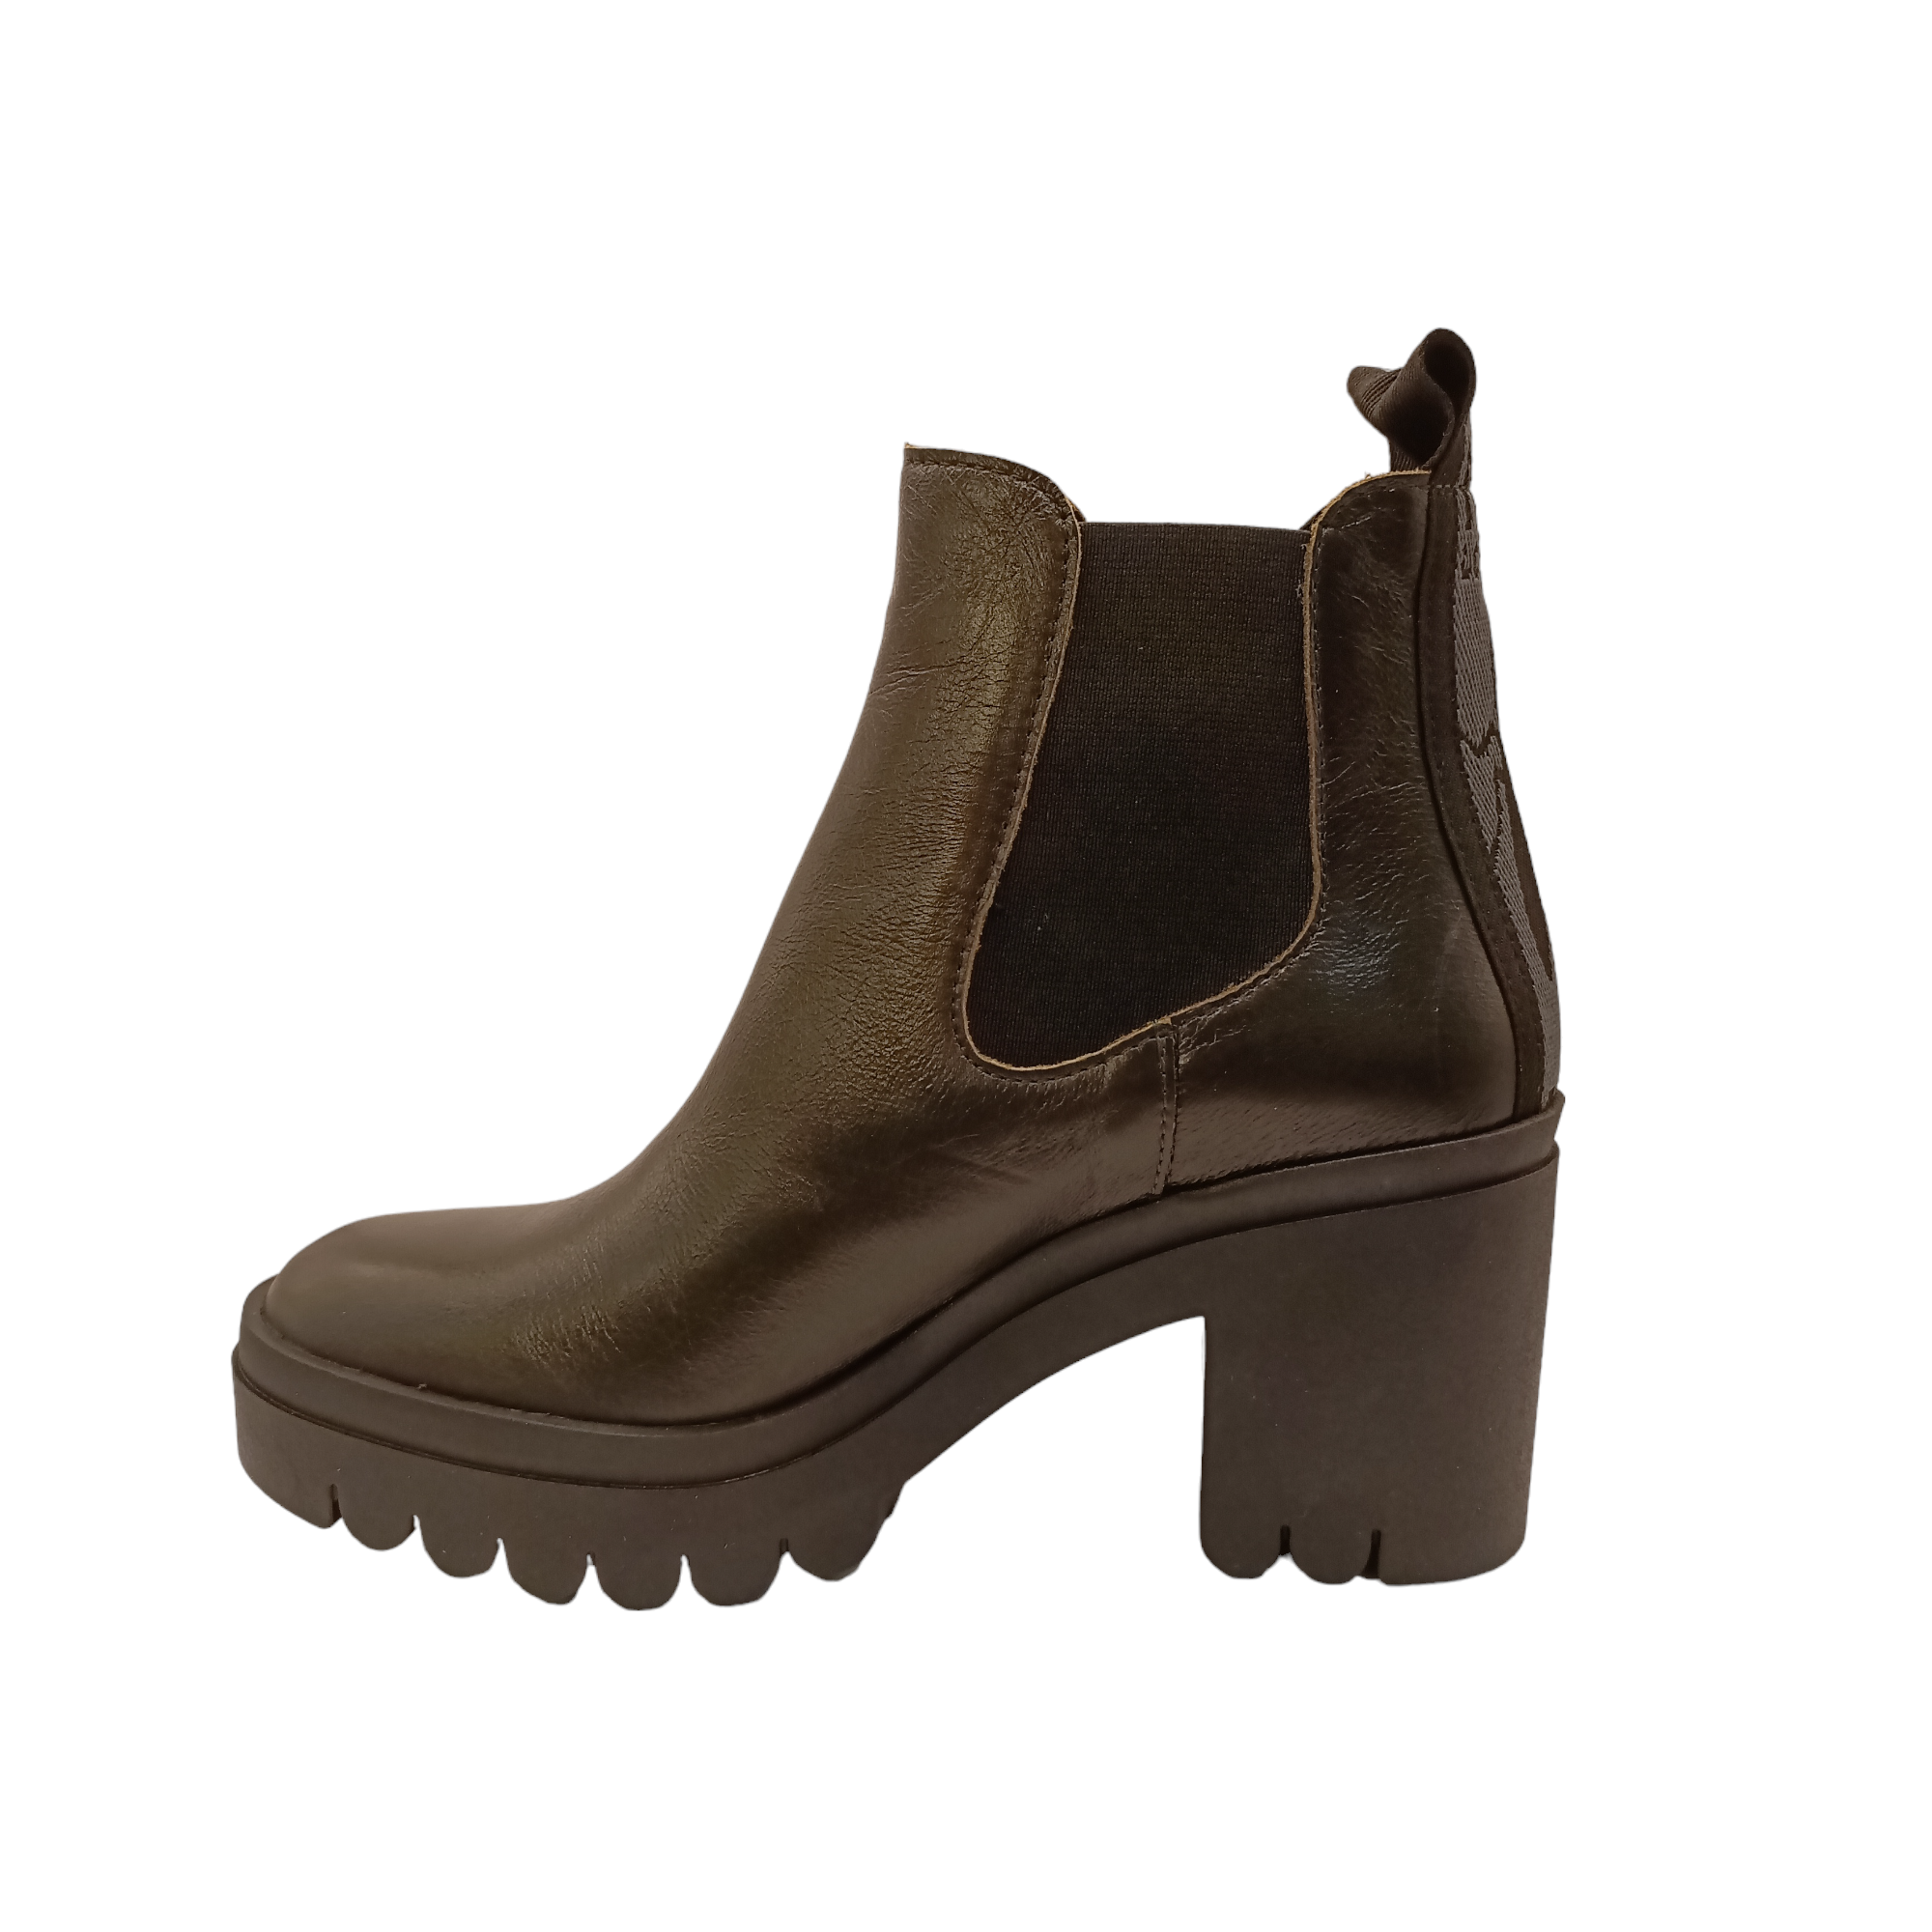 Shop Tope Fly London - with shoe&amp;me - from Fly London - General - Boot, Winter, Womens - [collection]